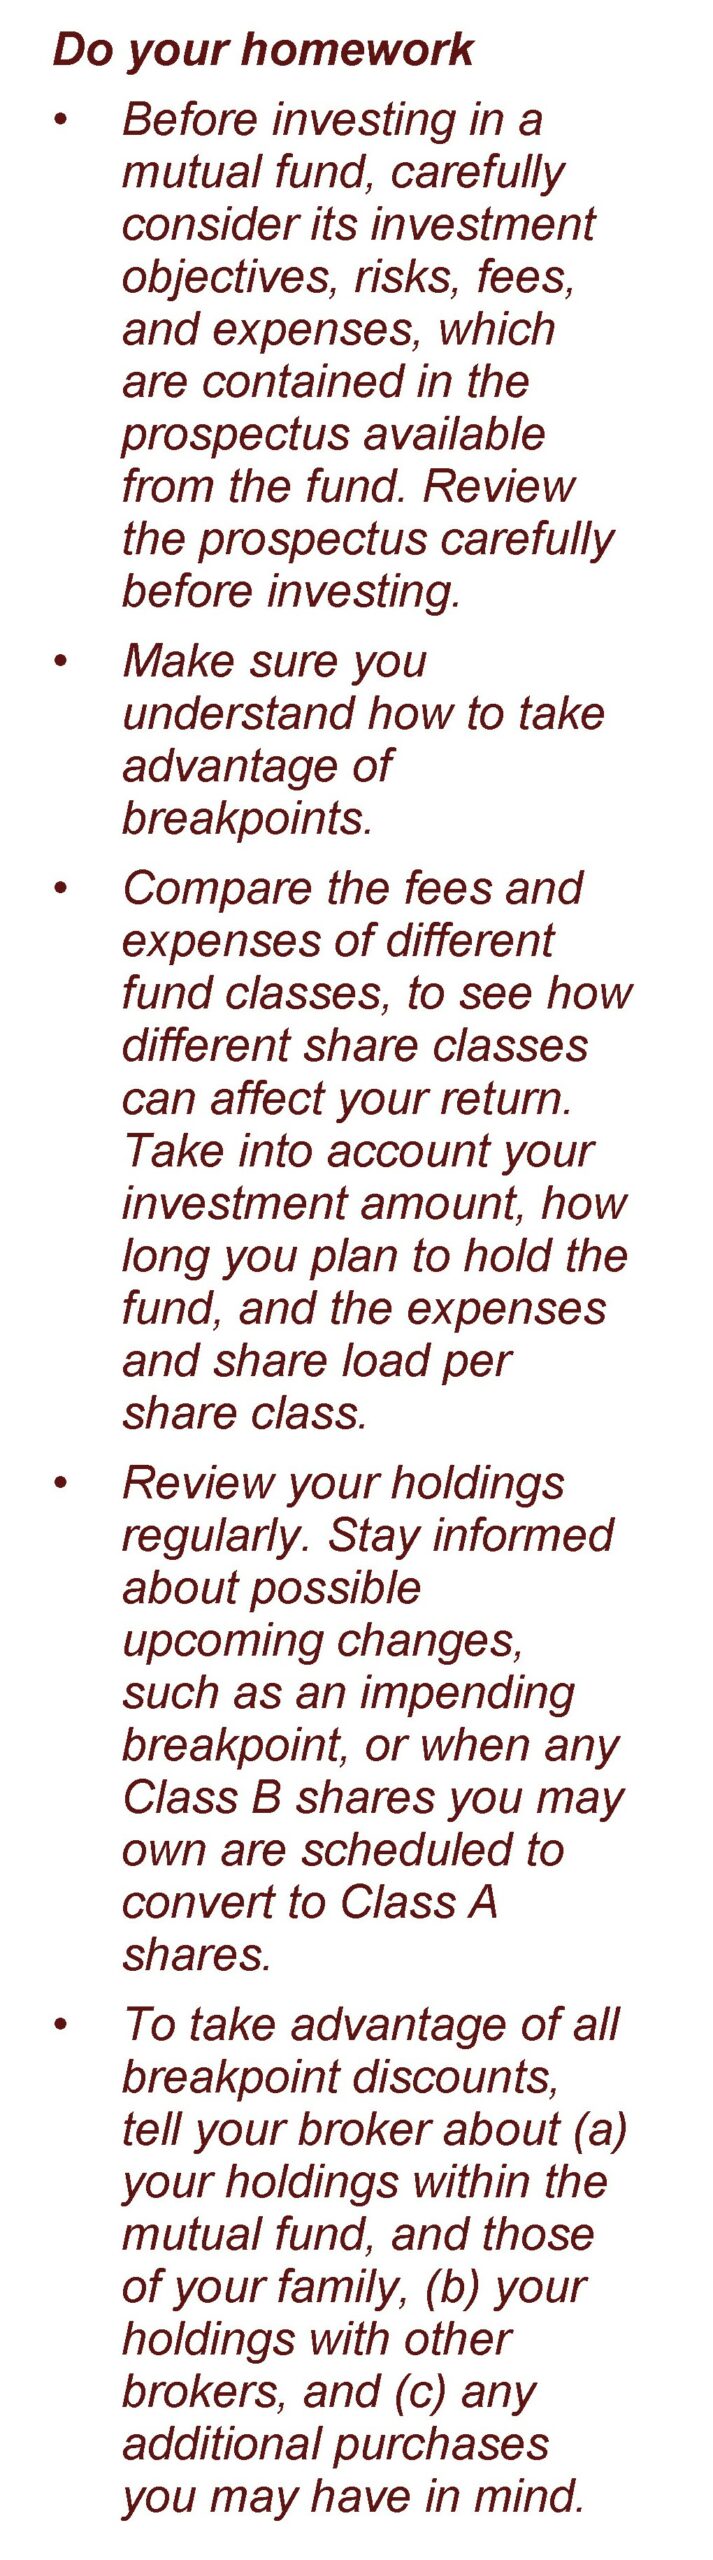 Image wording: Do your homework Before investing in a mutual fund, carefully consider its investment objectives, risks, fees, and expenses, which are contained in the prospectus available from the fund. Review the prospectus carefully before investing. Make sure you understand how to take advantage of breakpoints. Compare the fees and expenses of different fund classes, to see how different share classes can affect your return. Take into account your investment amount, how long you plan to hold the fund, and the expenses and share load per share class. Review your holdings regularly. Stay informed about possible upcoming changes, such as an impending breakpoint, or when any Class B shares you may own are scheduled to convert to Class A shares. To take advantage of all breakpoint discounts, tell your broker about (a) your holdings within the mutual fund, and those of your family, (b) your holdings with other brokers, and (c) any additional purchases you may have in mind. Article title: The ABCs of Mutual Fund Share Classes